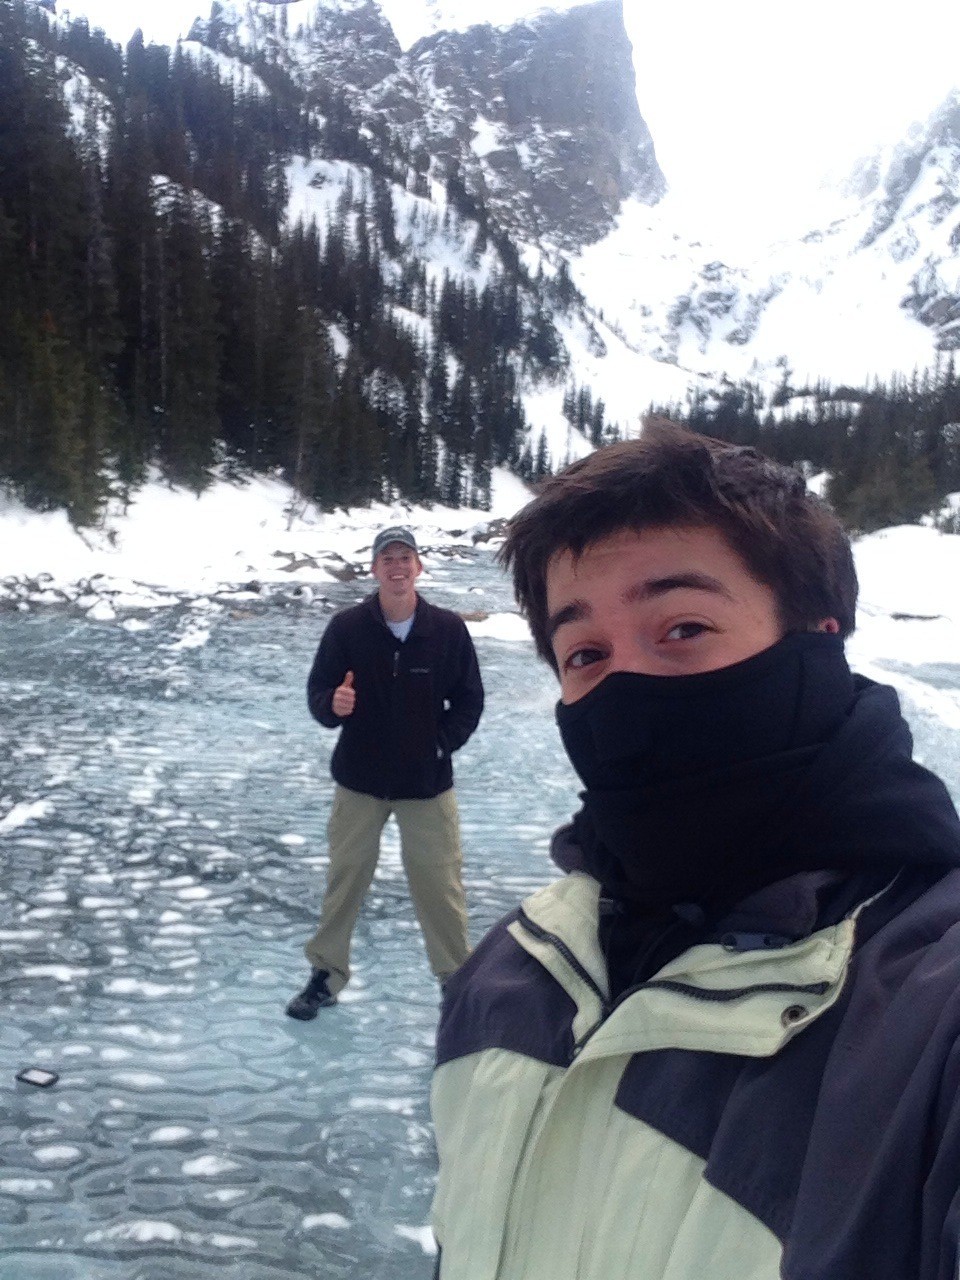 Aidan and his friend taking a selfie in the mountains